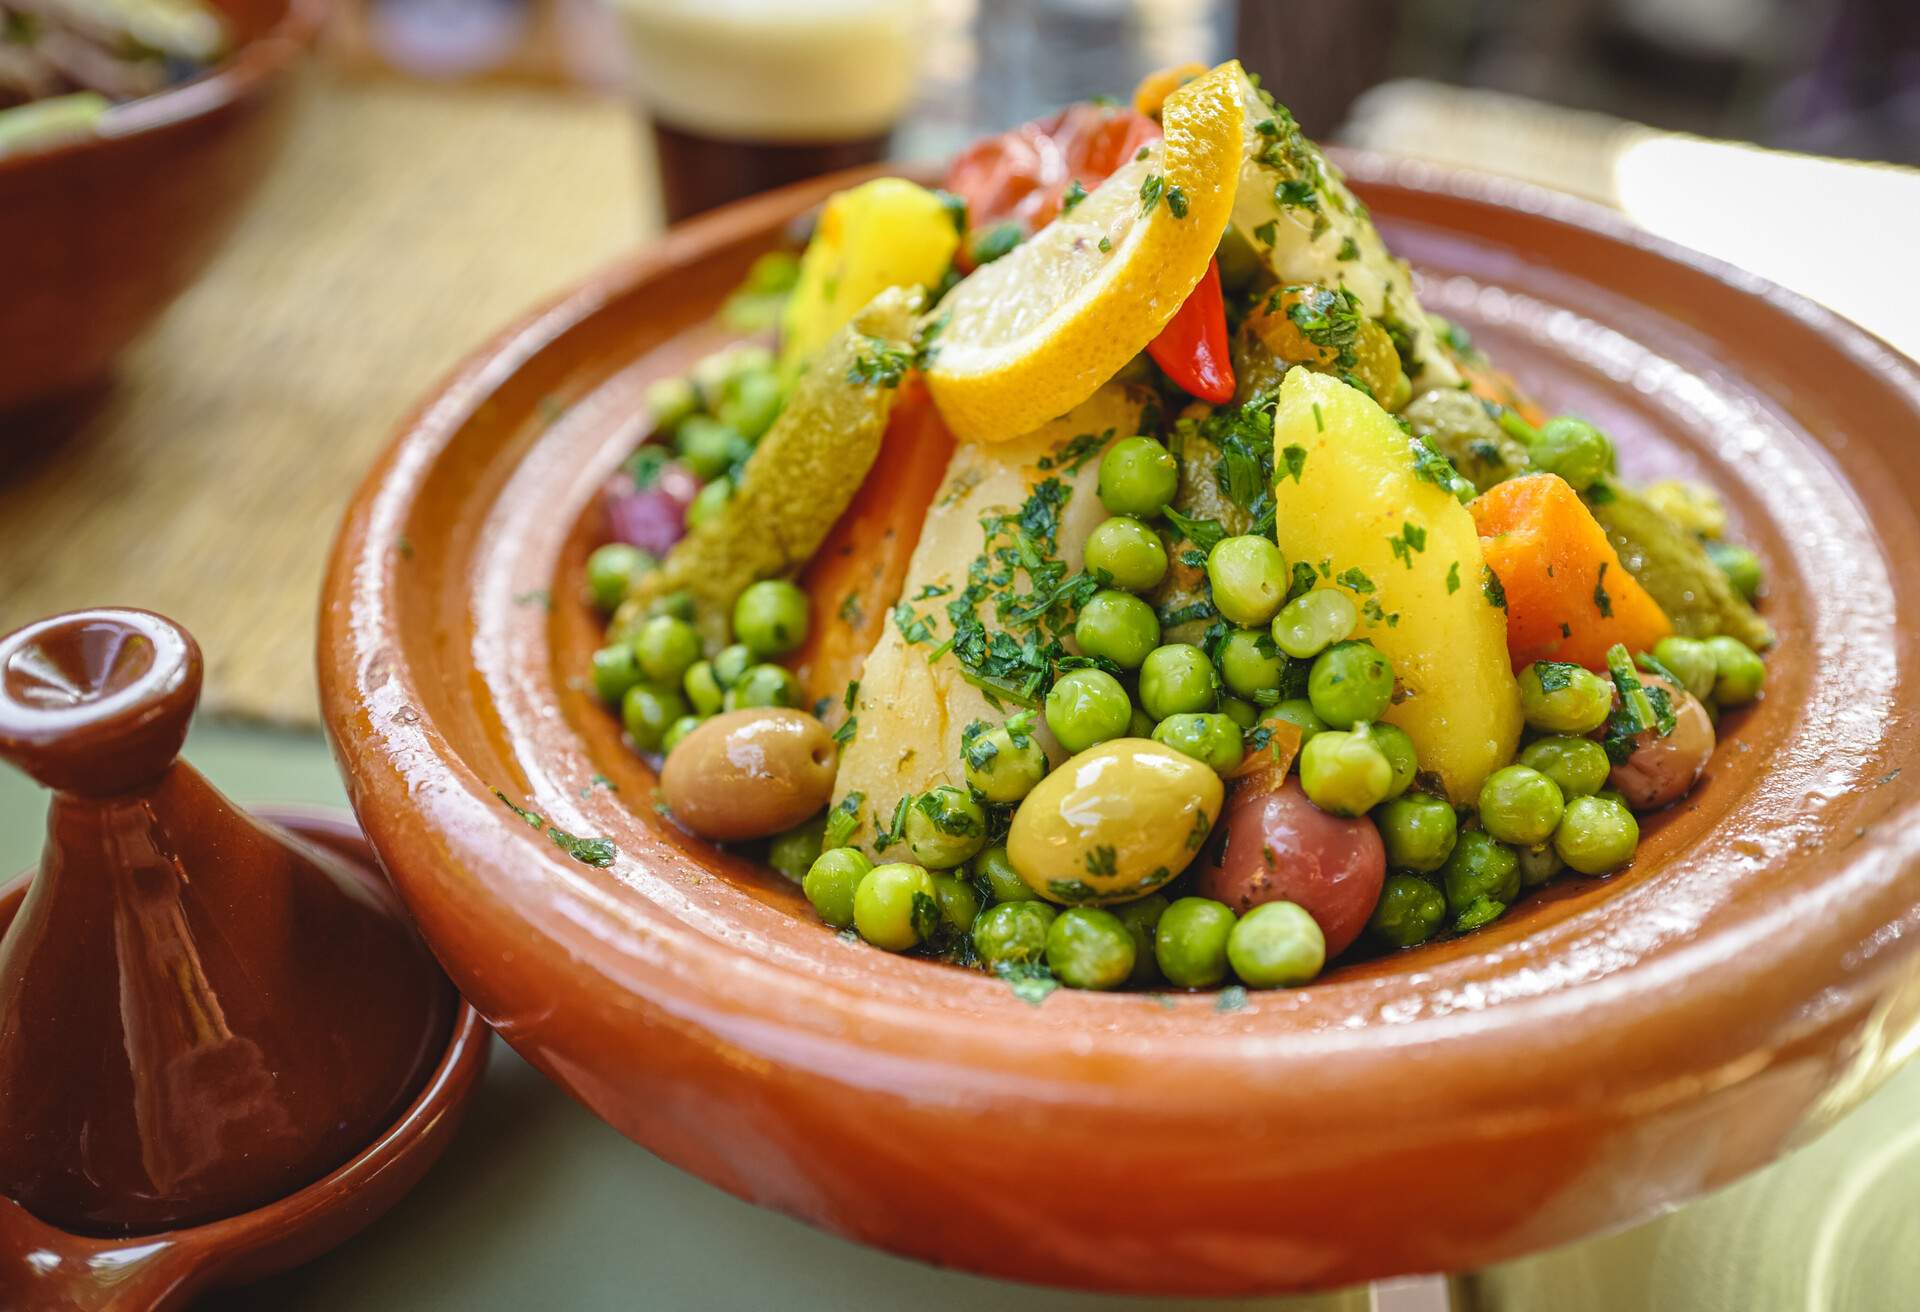 Close-up view of vegetables prepared in traditional Moroccan food Tajine, a Maghrebi dish named after the earthenware pot in which it is cooked. Morocco, North Africa.